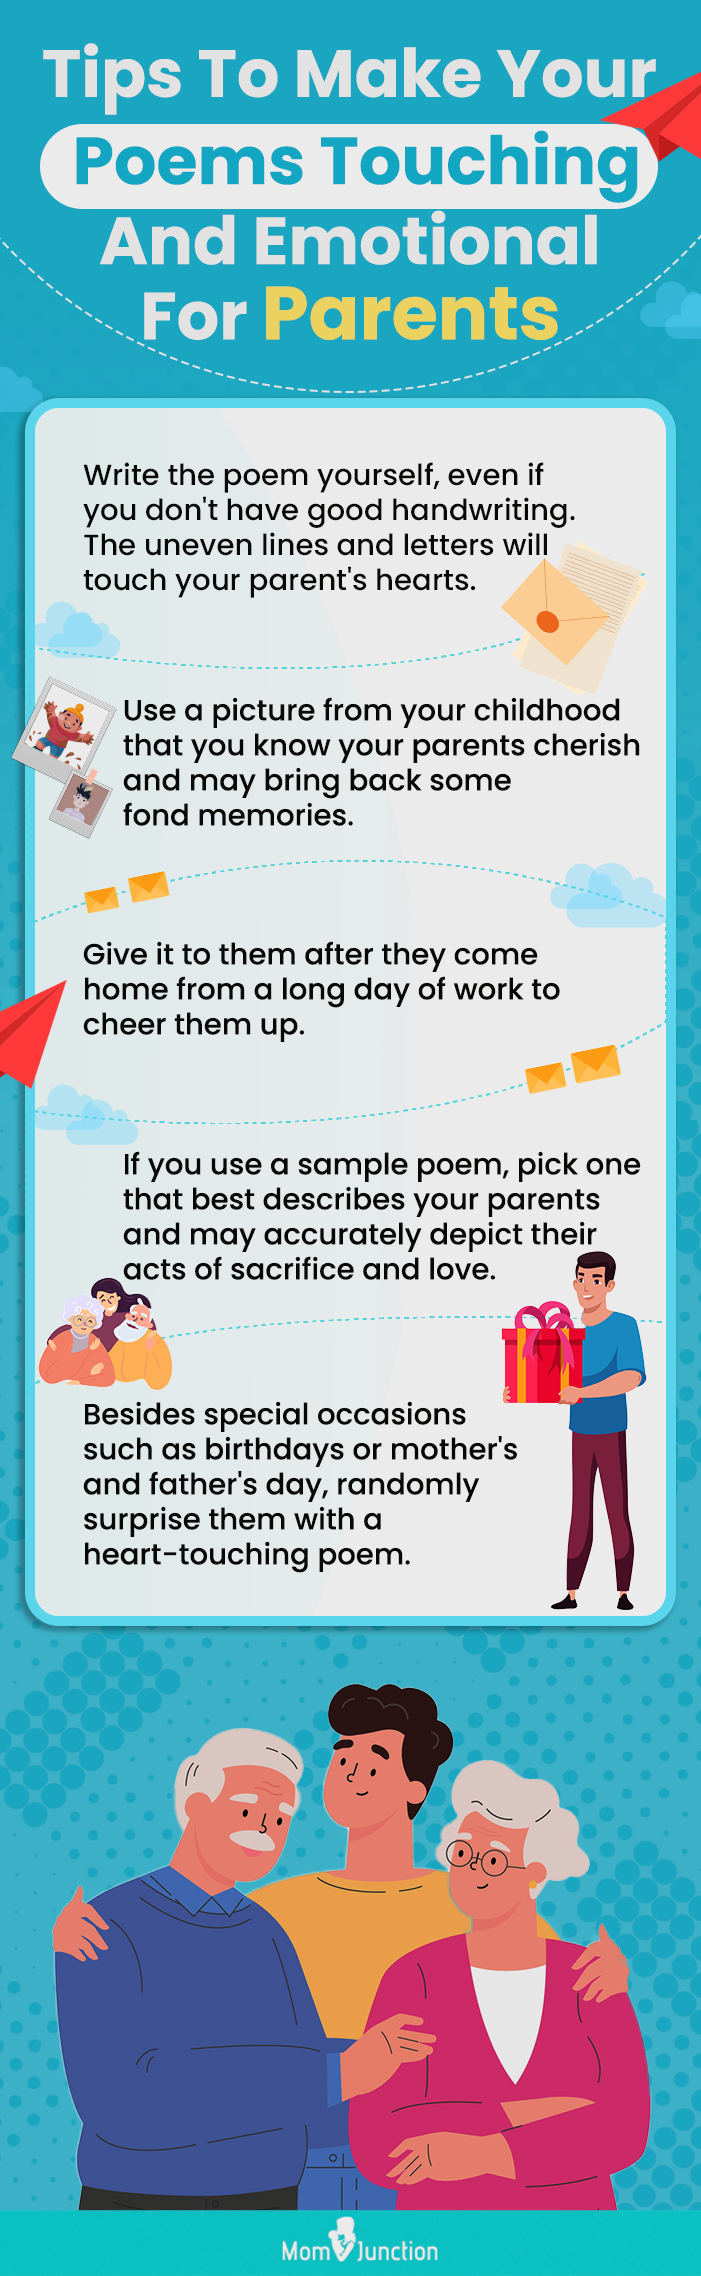 tips to make your poems touching and emotional for parents [infographic]